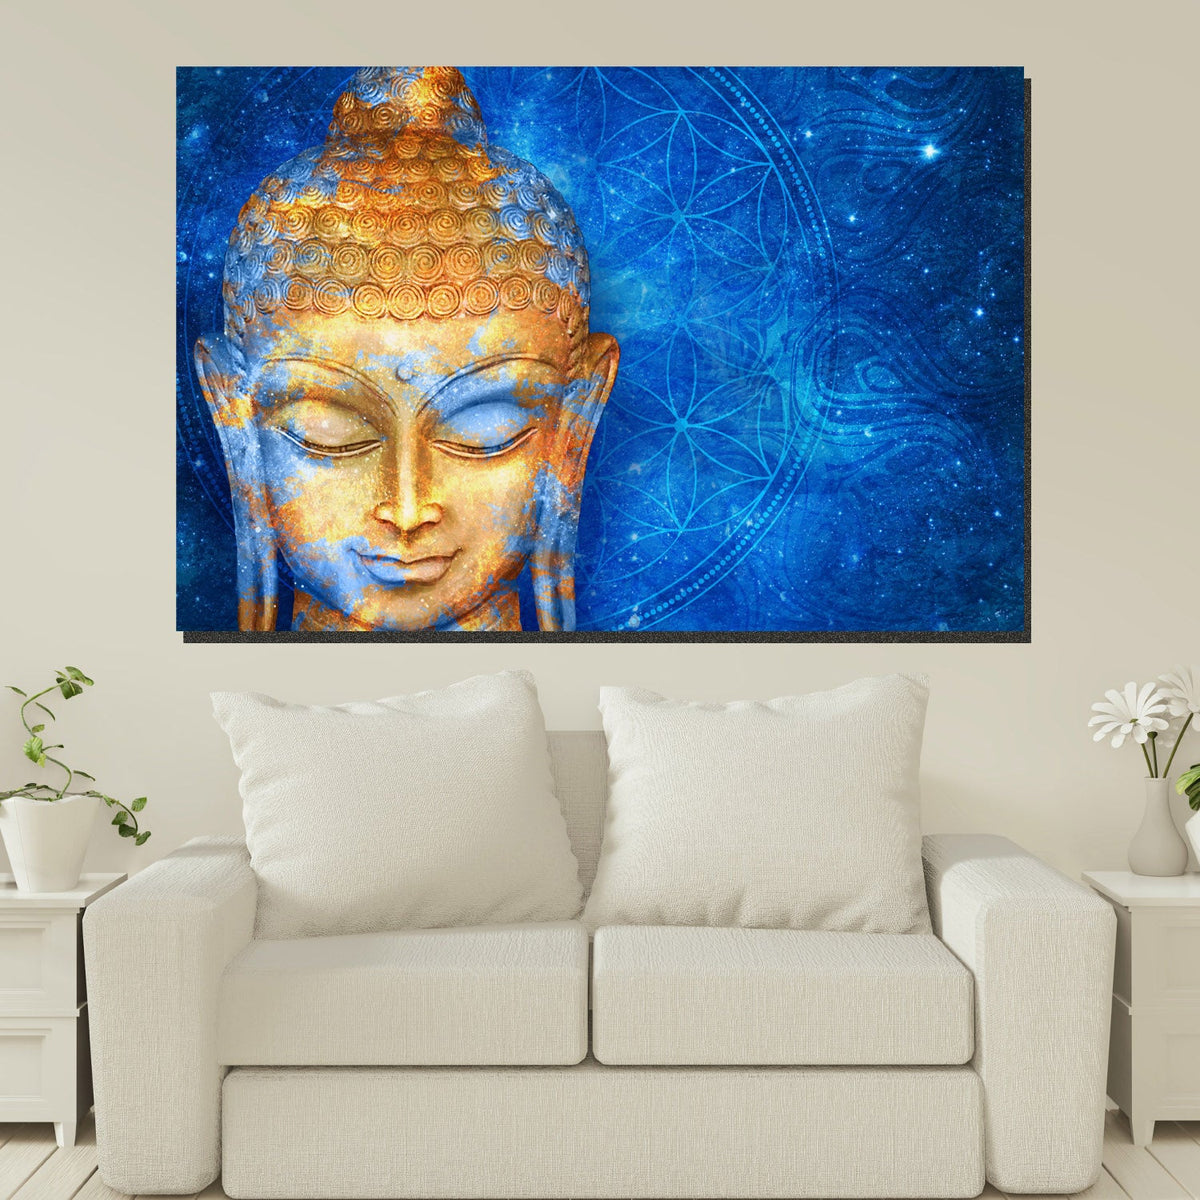 https://cdn.shopify.com/s/files/1/0387/9986/8044/products/BuddhaTurquoiseCanvasPrintStretched-2.jpg